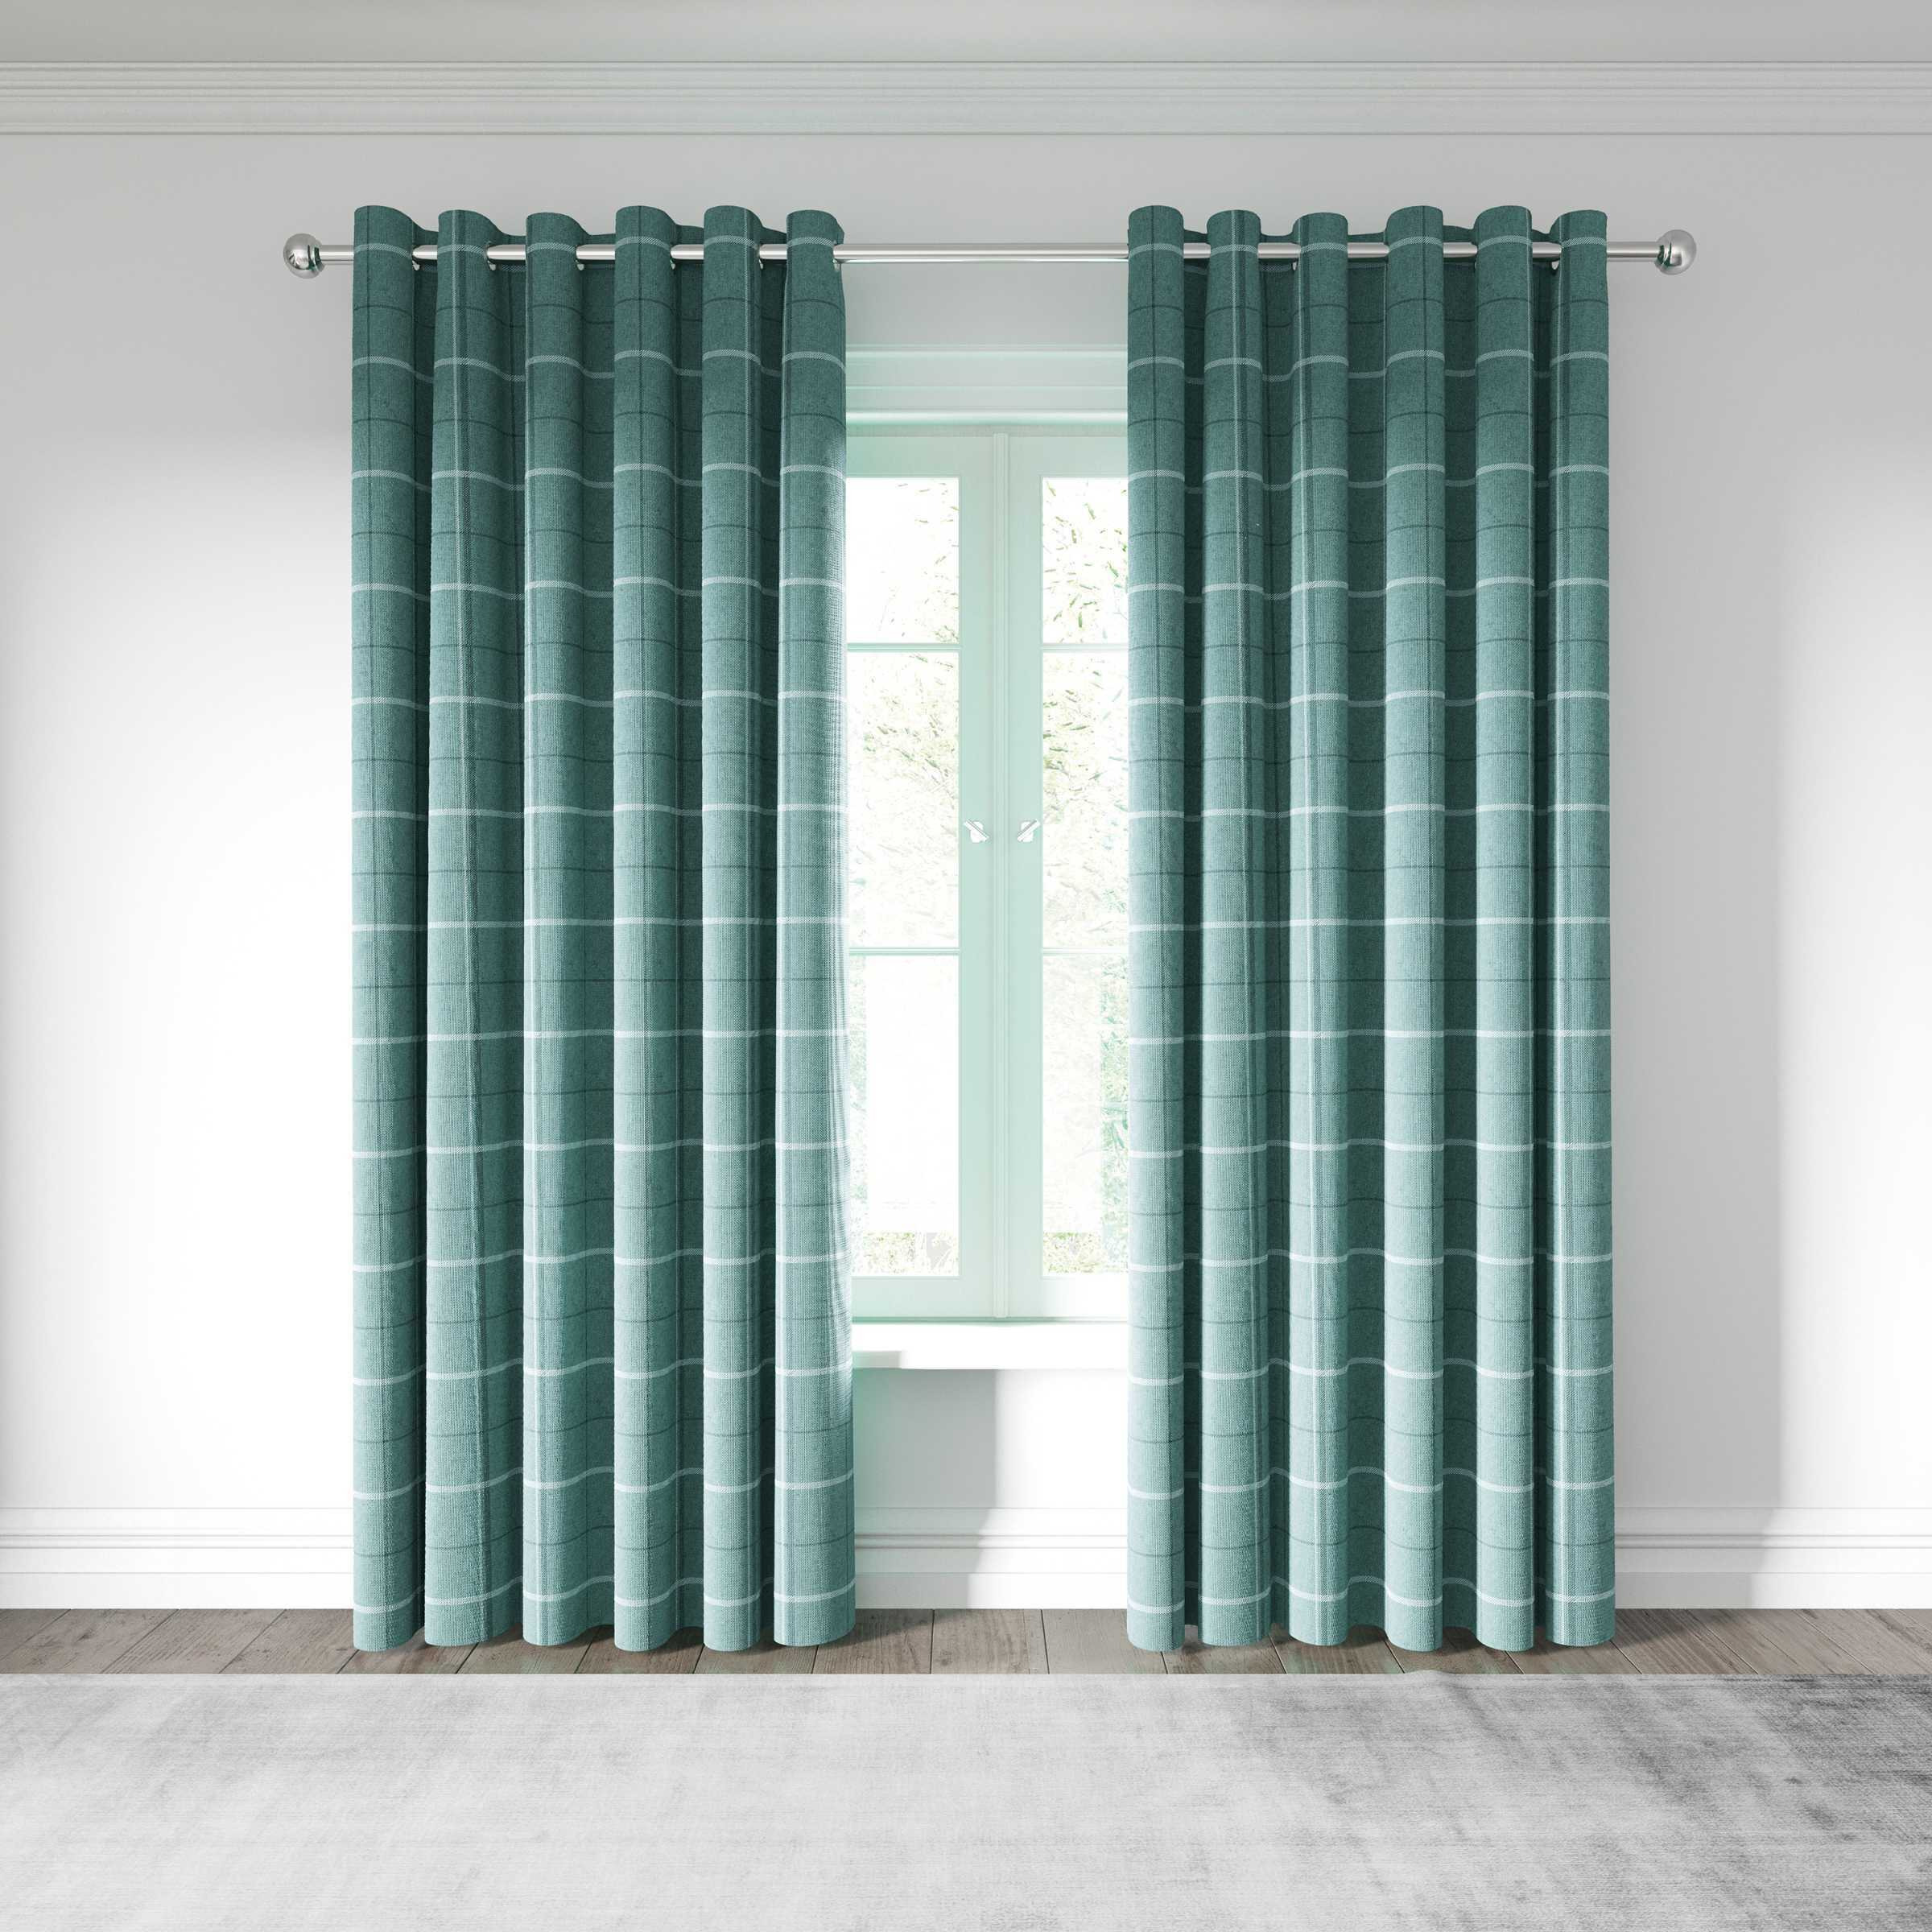 "Helena Springfield Harper Lined Curtains 66"" x 90"", Duck Egg" - image 1